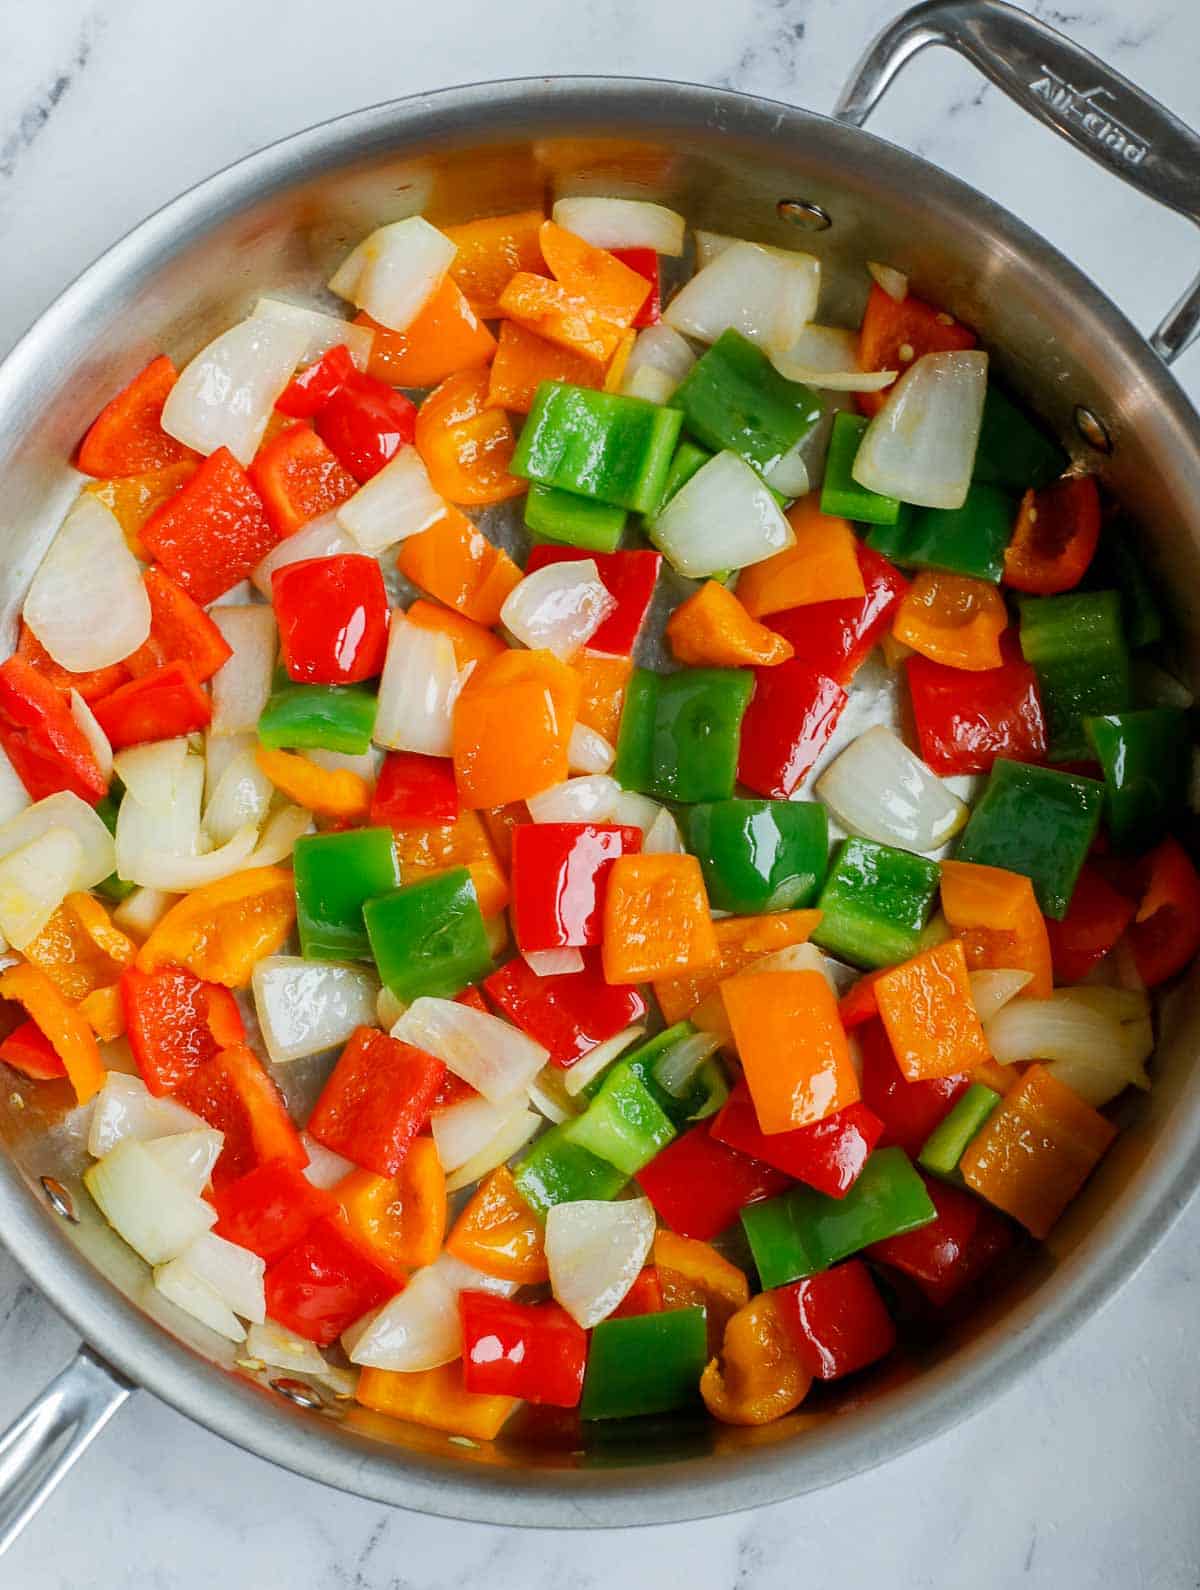 Stir fry veggies for sweet and sour chicken.